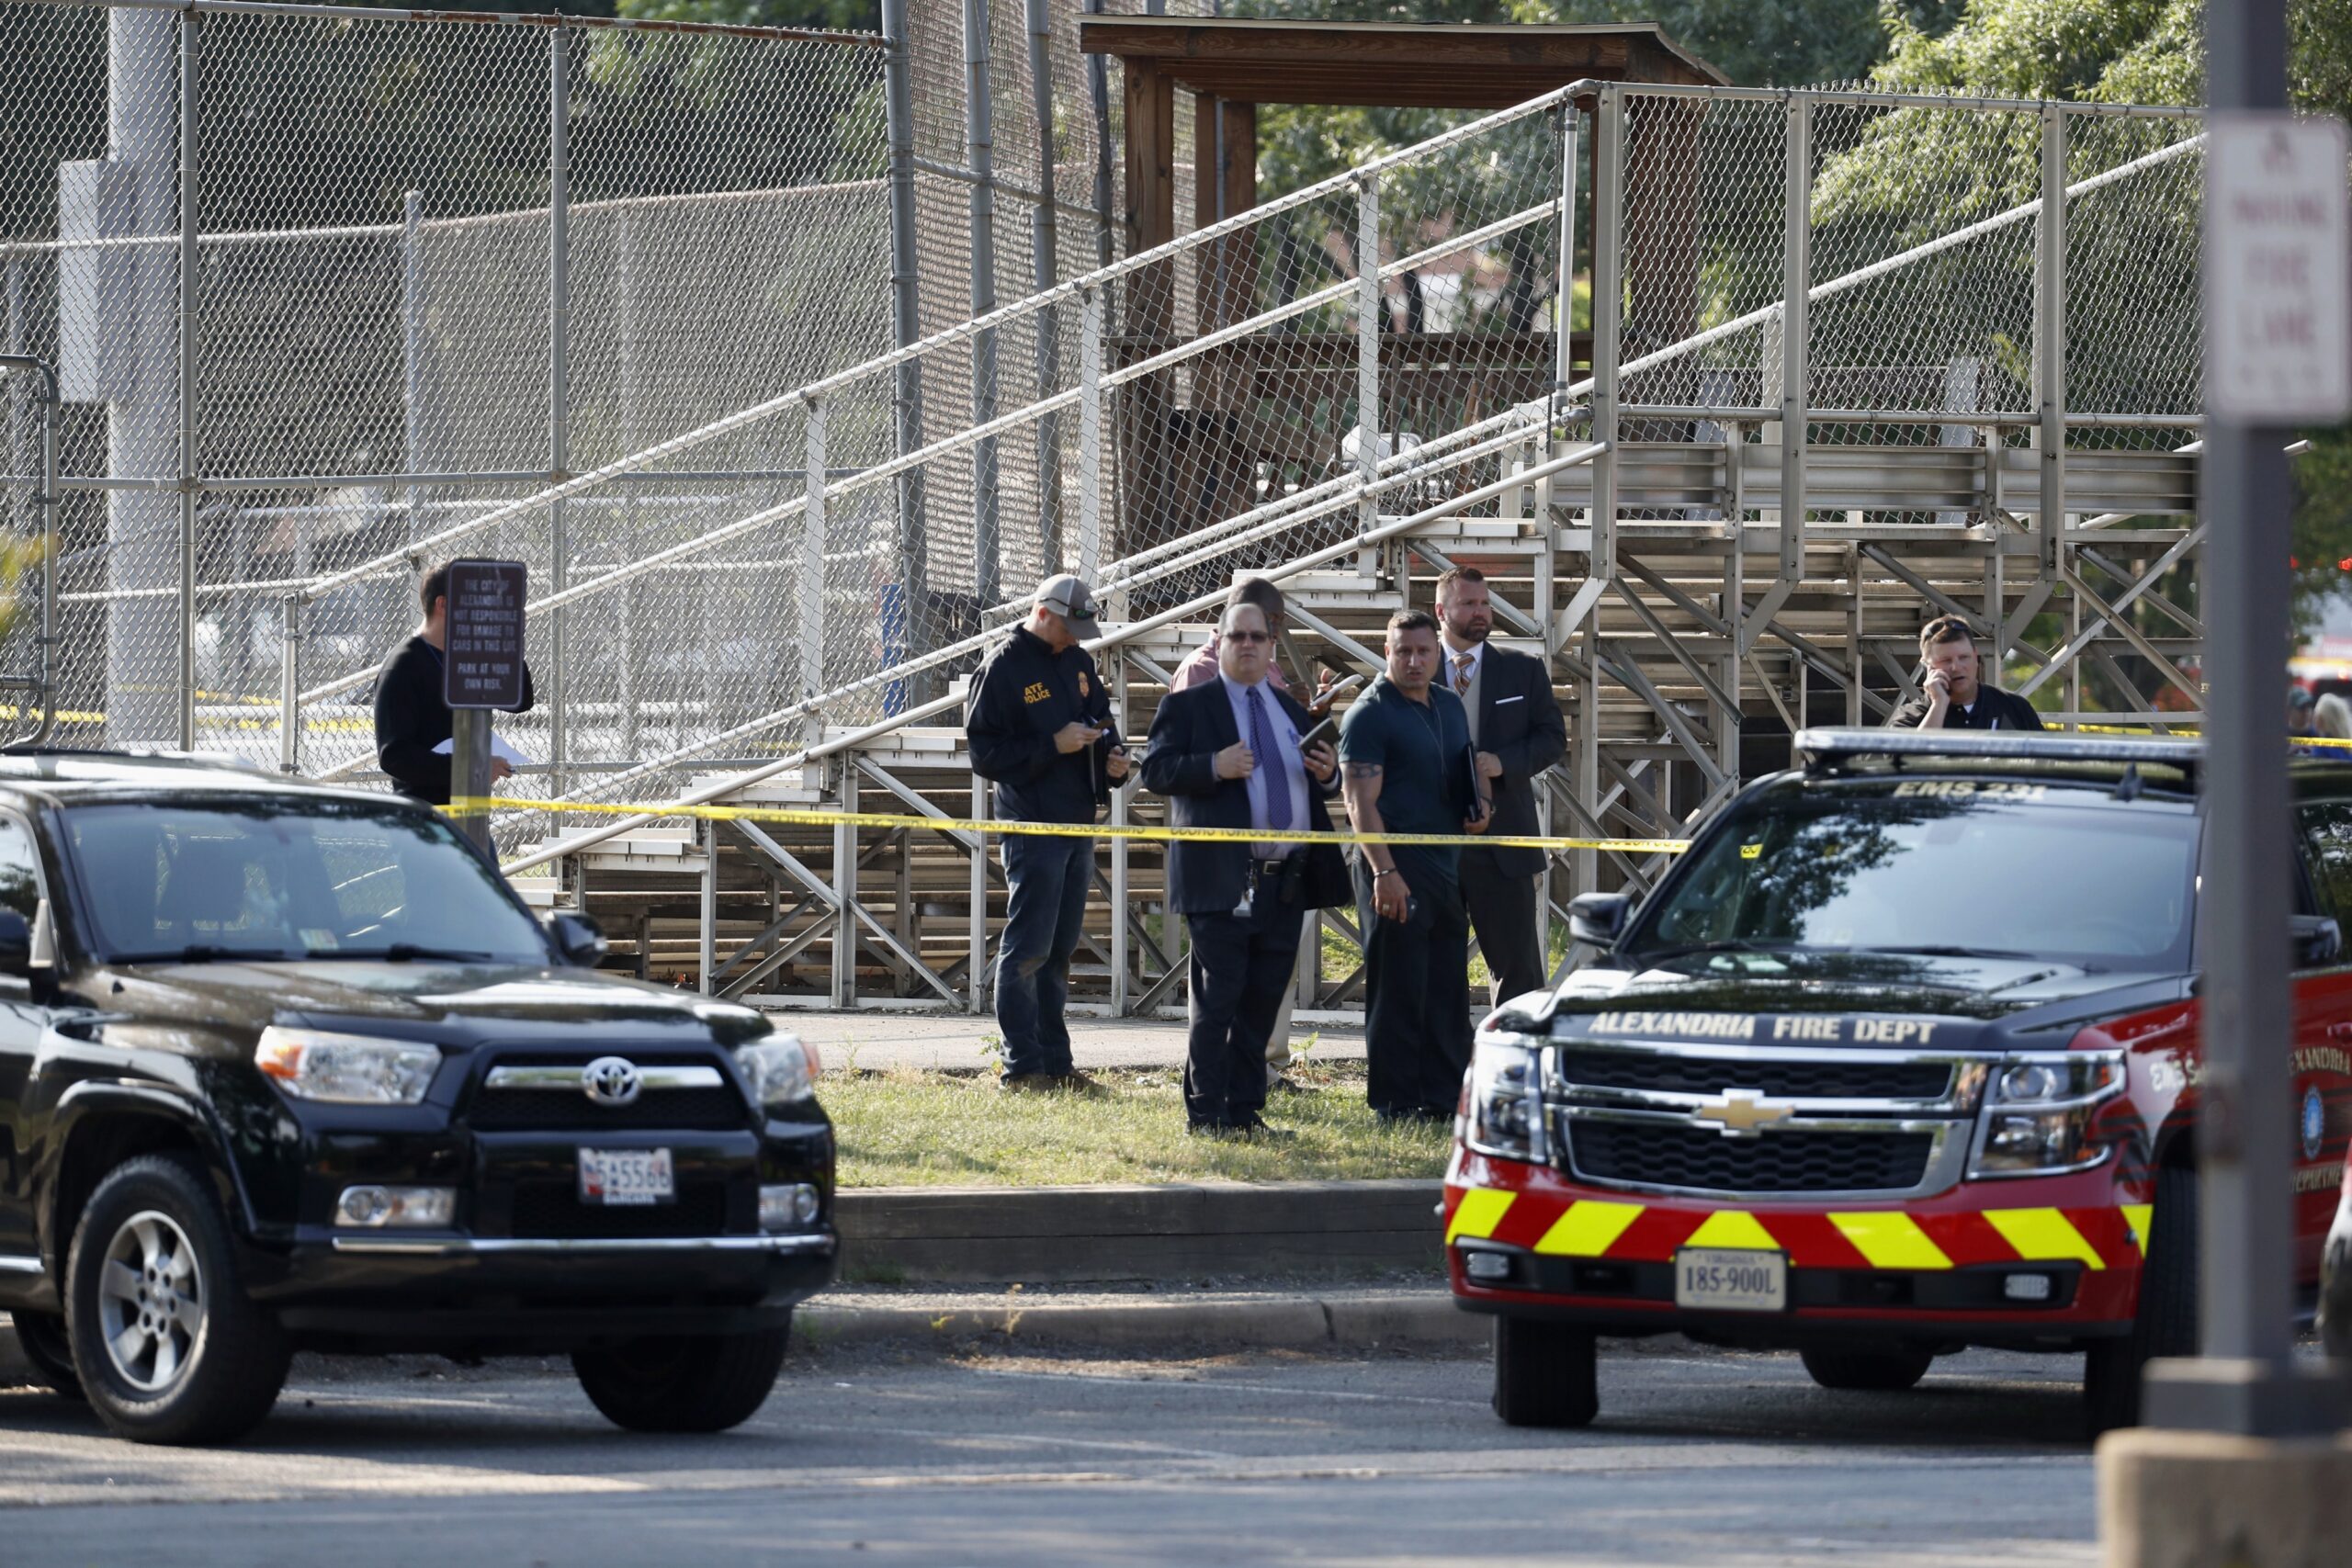 Law enforcement officers investigate the scene of a shooting near a baseball field in Alexandria, Virginia